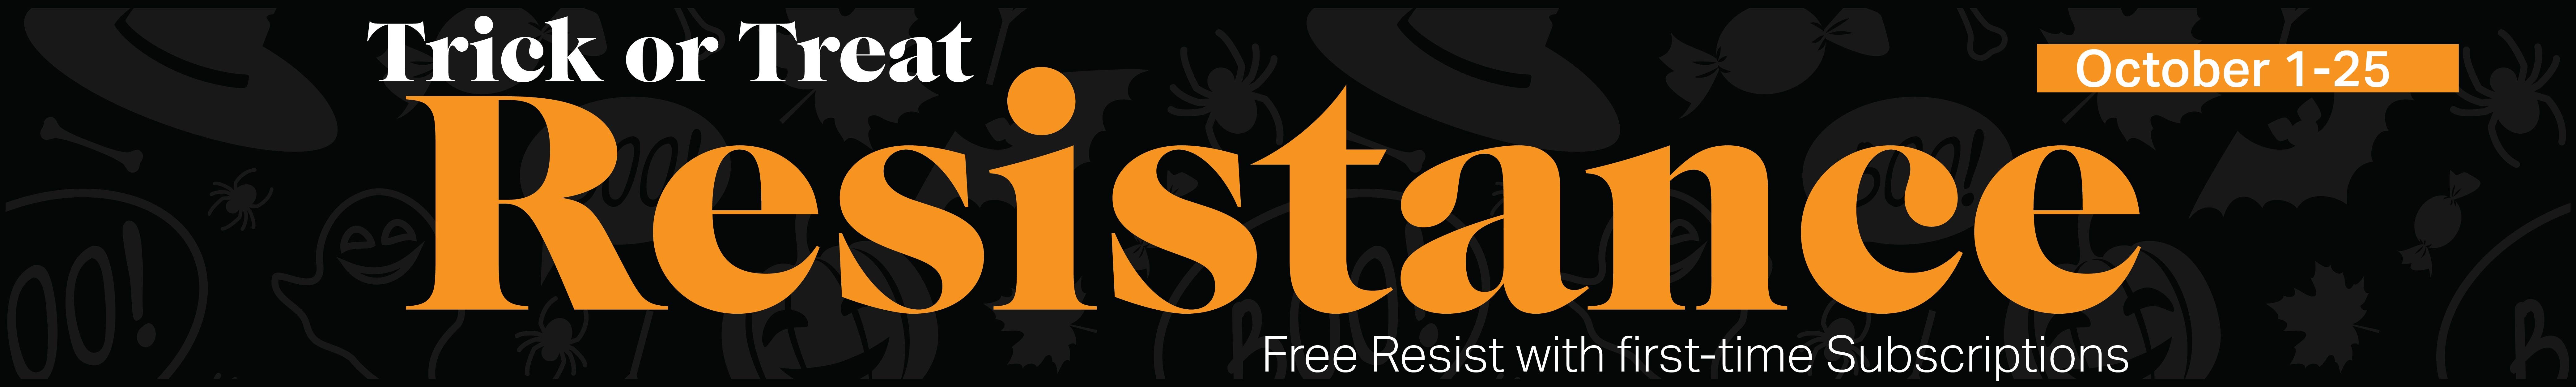 Trick or Treat Resistance Promo